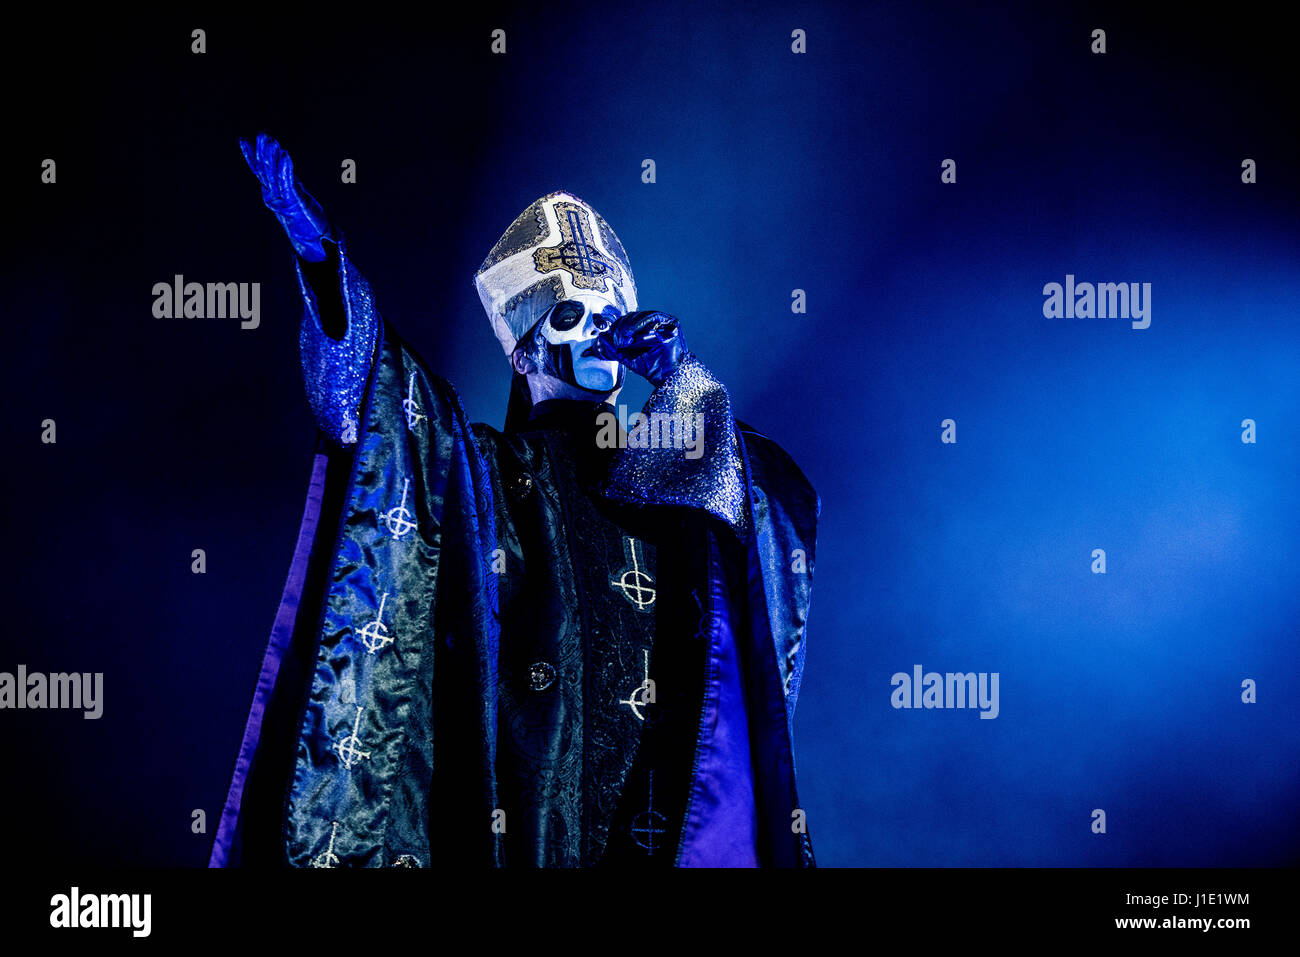 Milan, Italy 19 april 2017 Ghost band perform in Alcatraz.  Ghost is a Swedish heavy metal band that was formed in Linköping in 2008. In 2010, they released a 3-track demo followed by a 7' vinyl titled 'Elizabeth', and later their debut full-length album Opus Eponymous. The Grammis-nominated album was widely praised and increased their popularity significantly. Their second album and major label debut Infestissumam was released in 2013, debuted at number one in Sweden, and won the Grammis Award for Best Hard Rock/Metal Album. Credit: Alberto Gandolfo/Alamy Live News Stock Photo